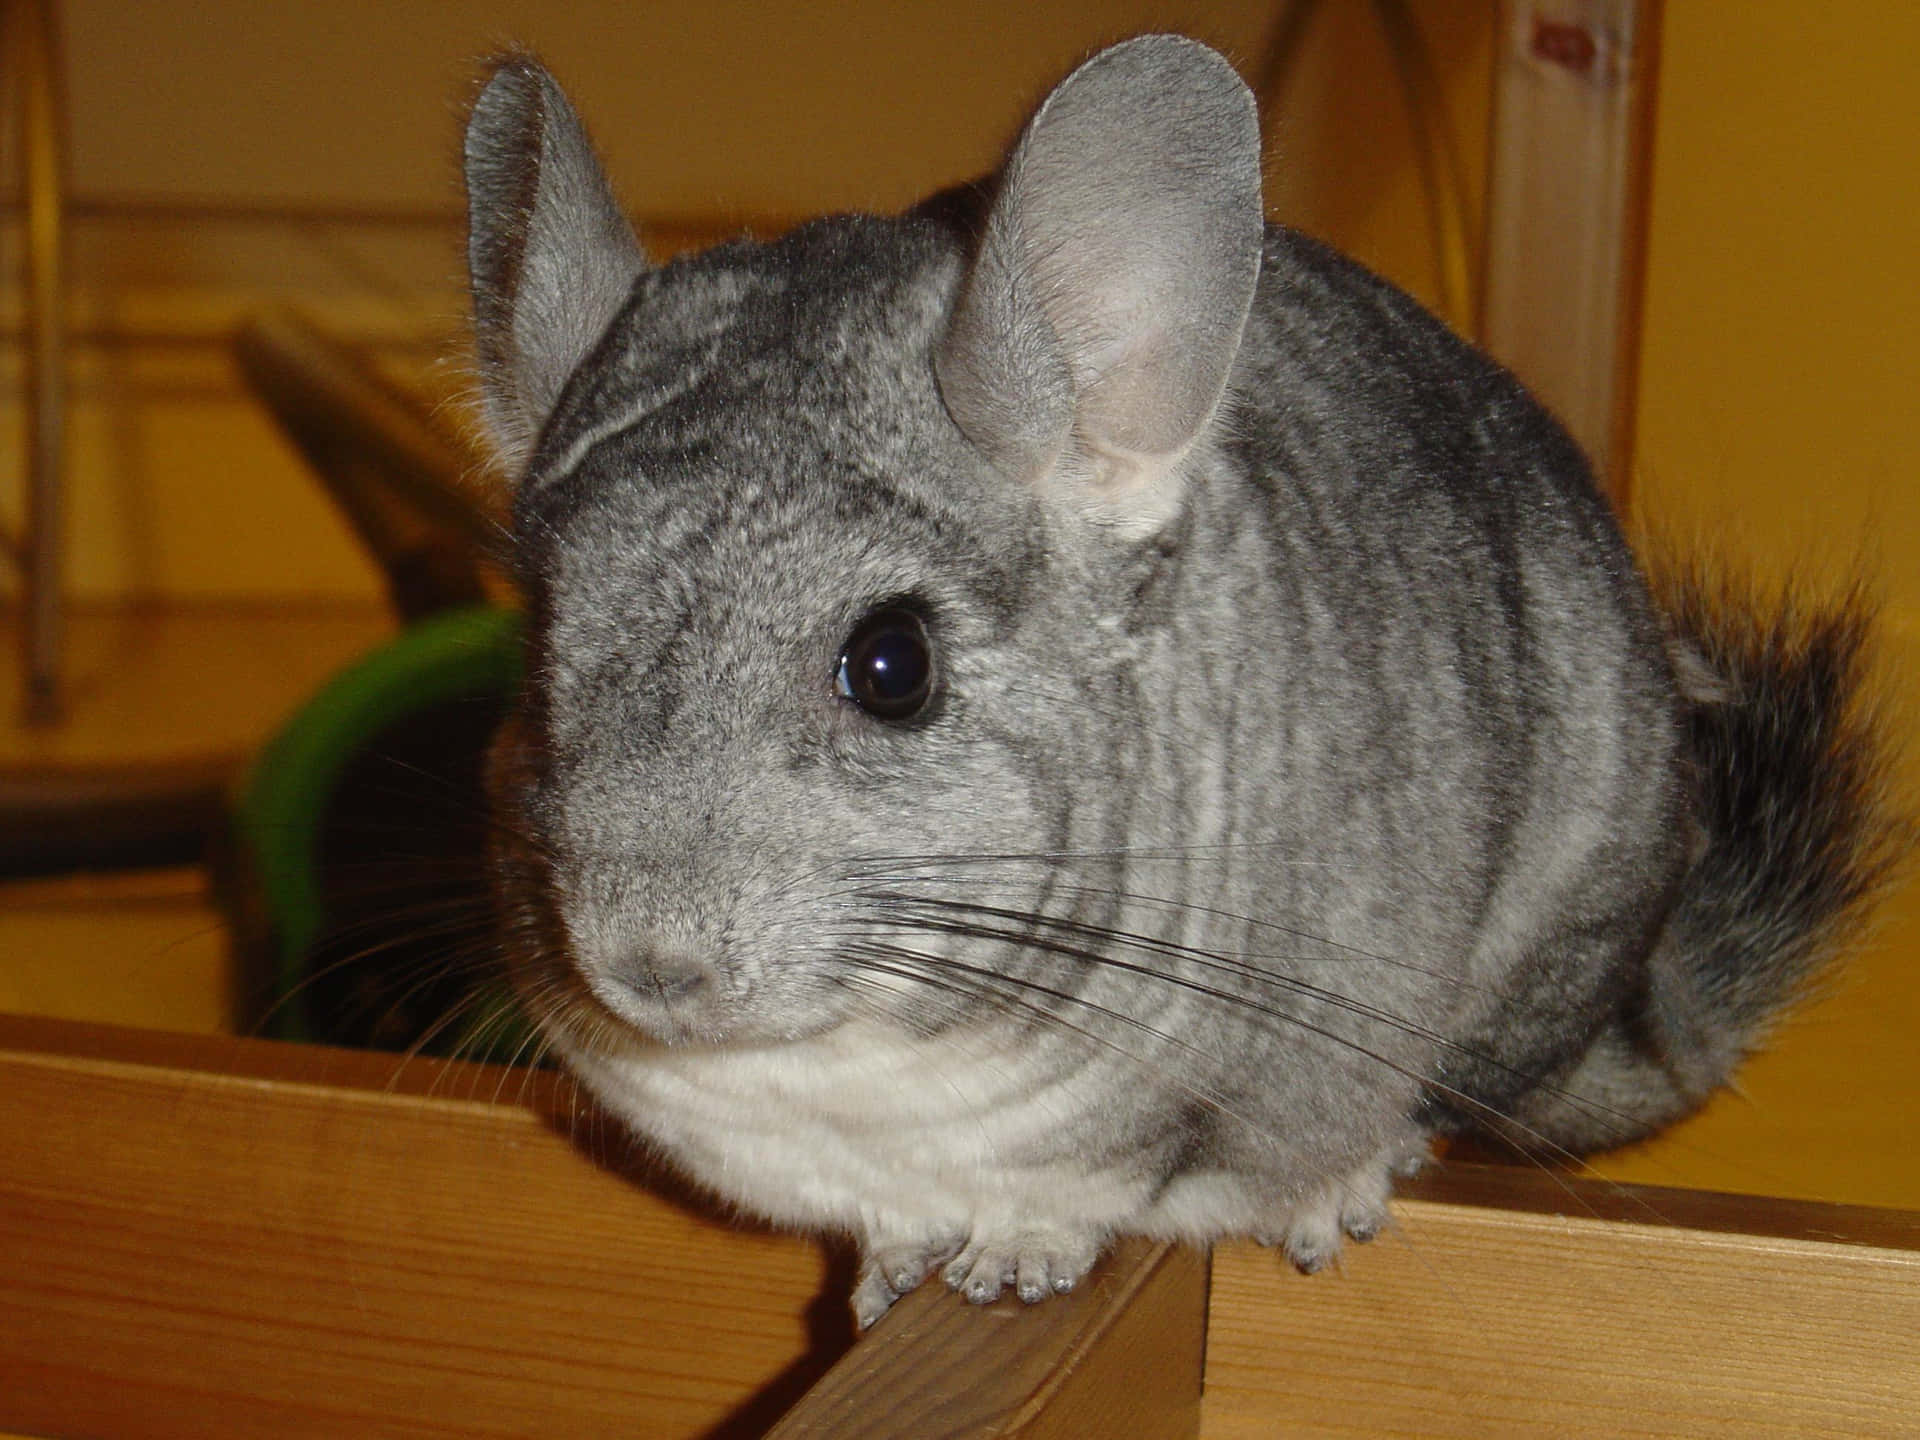 A close-up of a brown chinchilla with beautiful eyes.